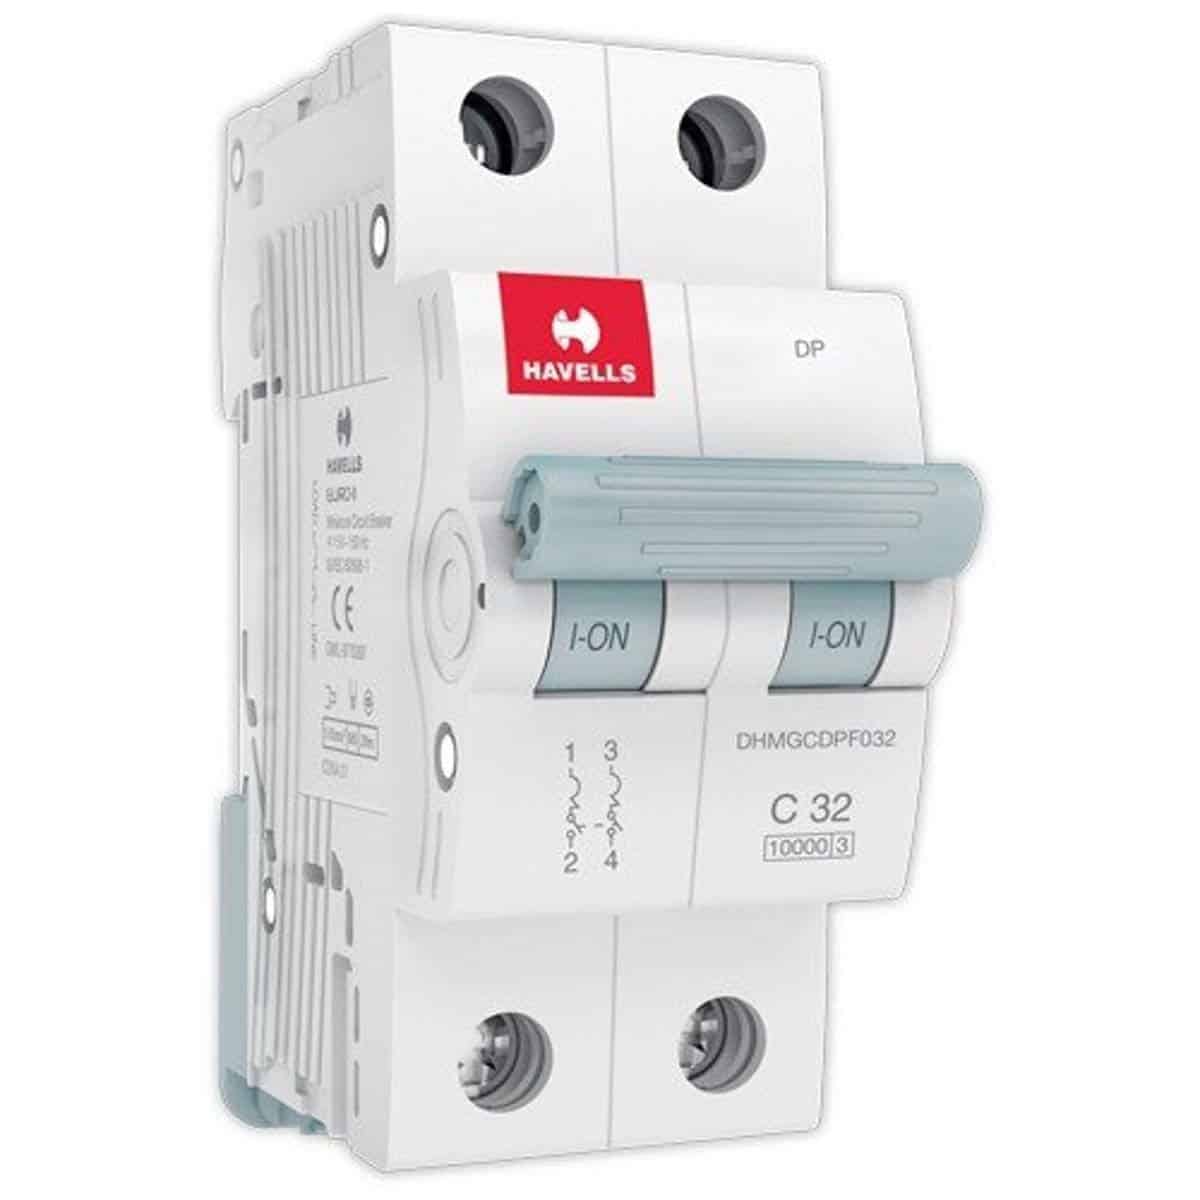 MCB (miniature circuit breaker) at best price from top brands